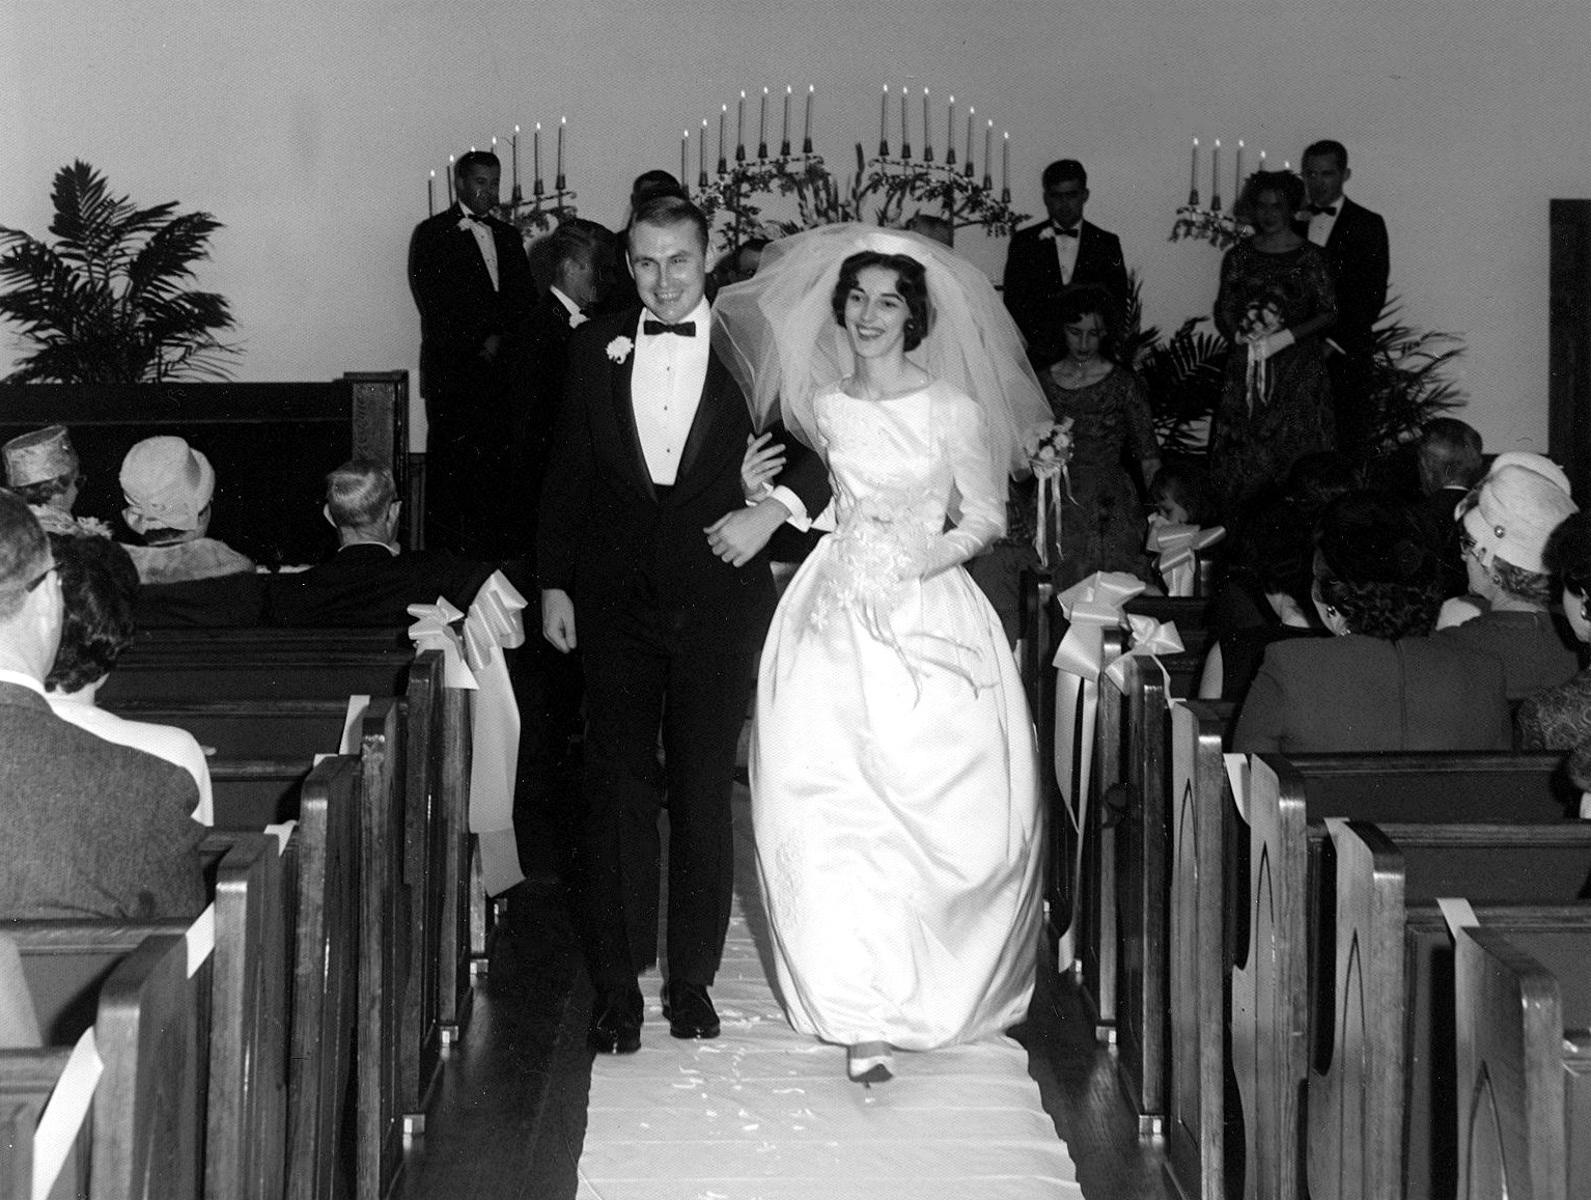 Mom and Dad on their wedding